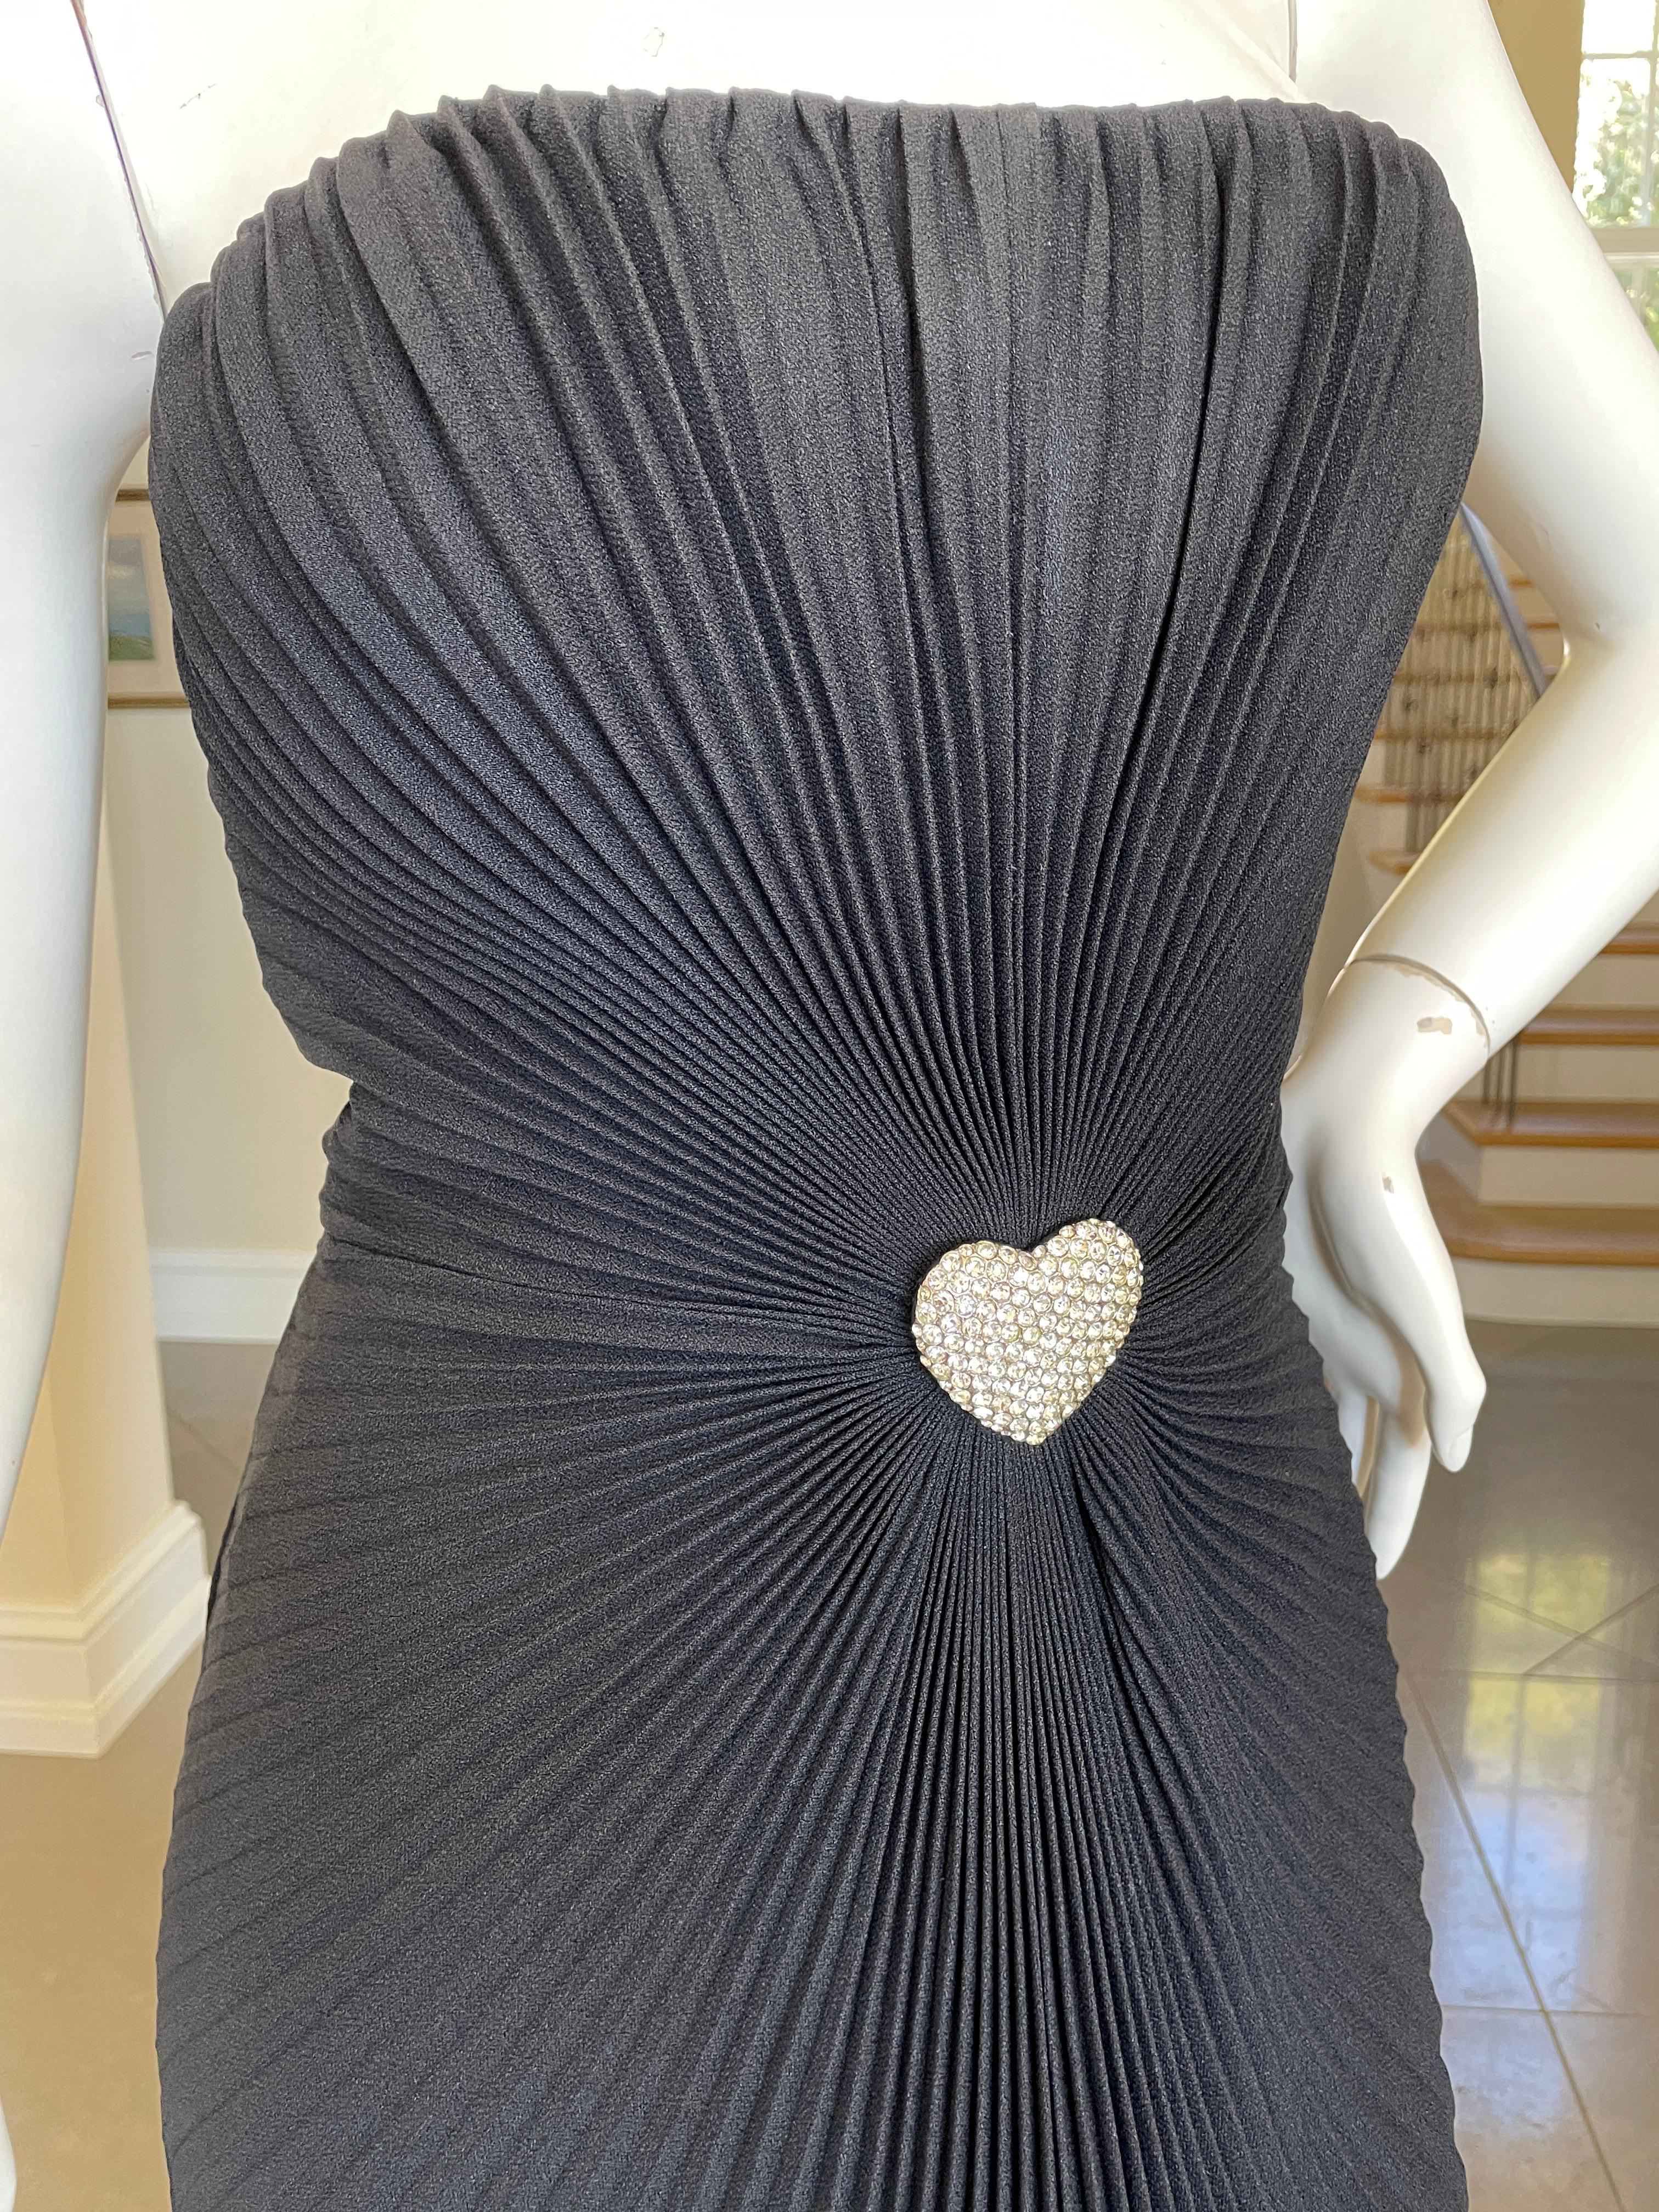 Loris Azzaro Couture 80's Strapless Pleated Evening Dress w Crystal Heart Accent In Excellent Condition For Sale In Cloverdale, CA